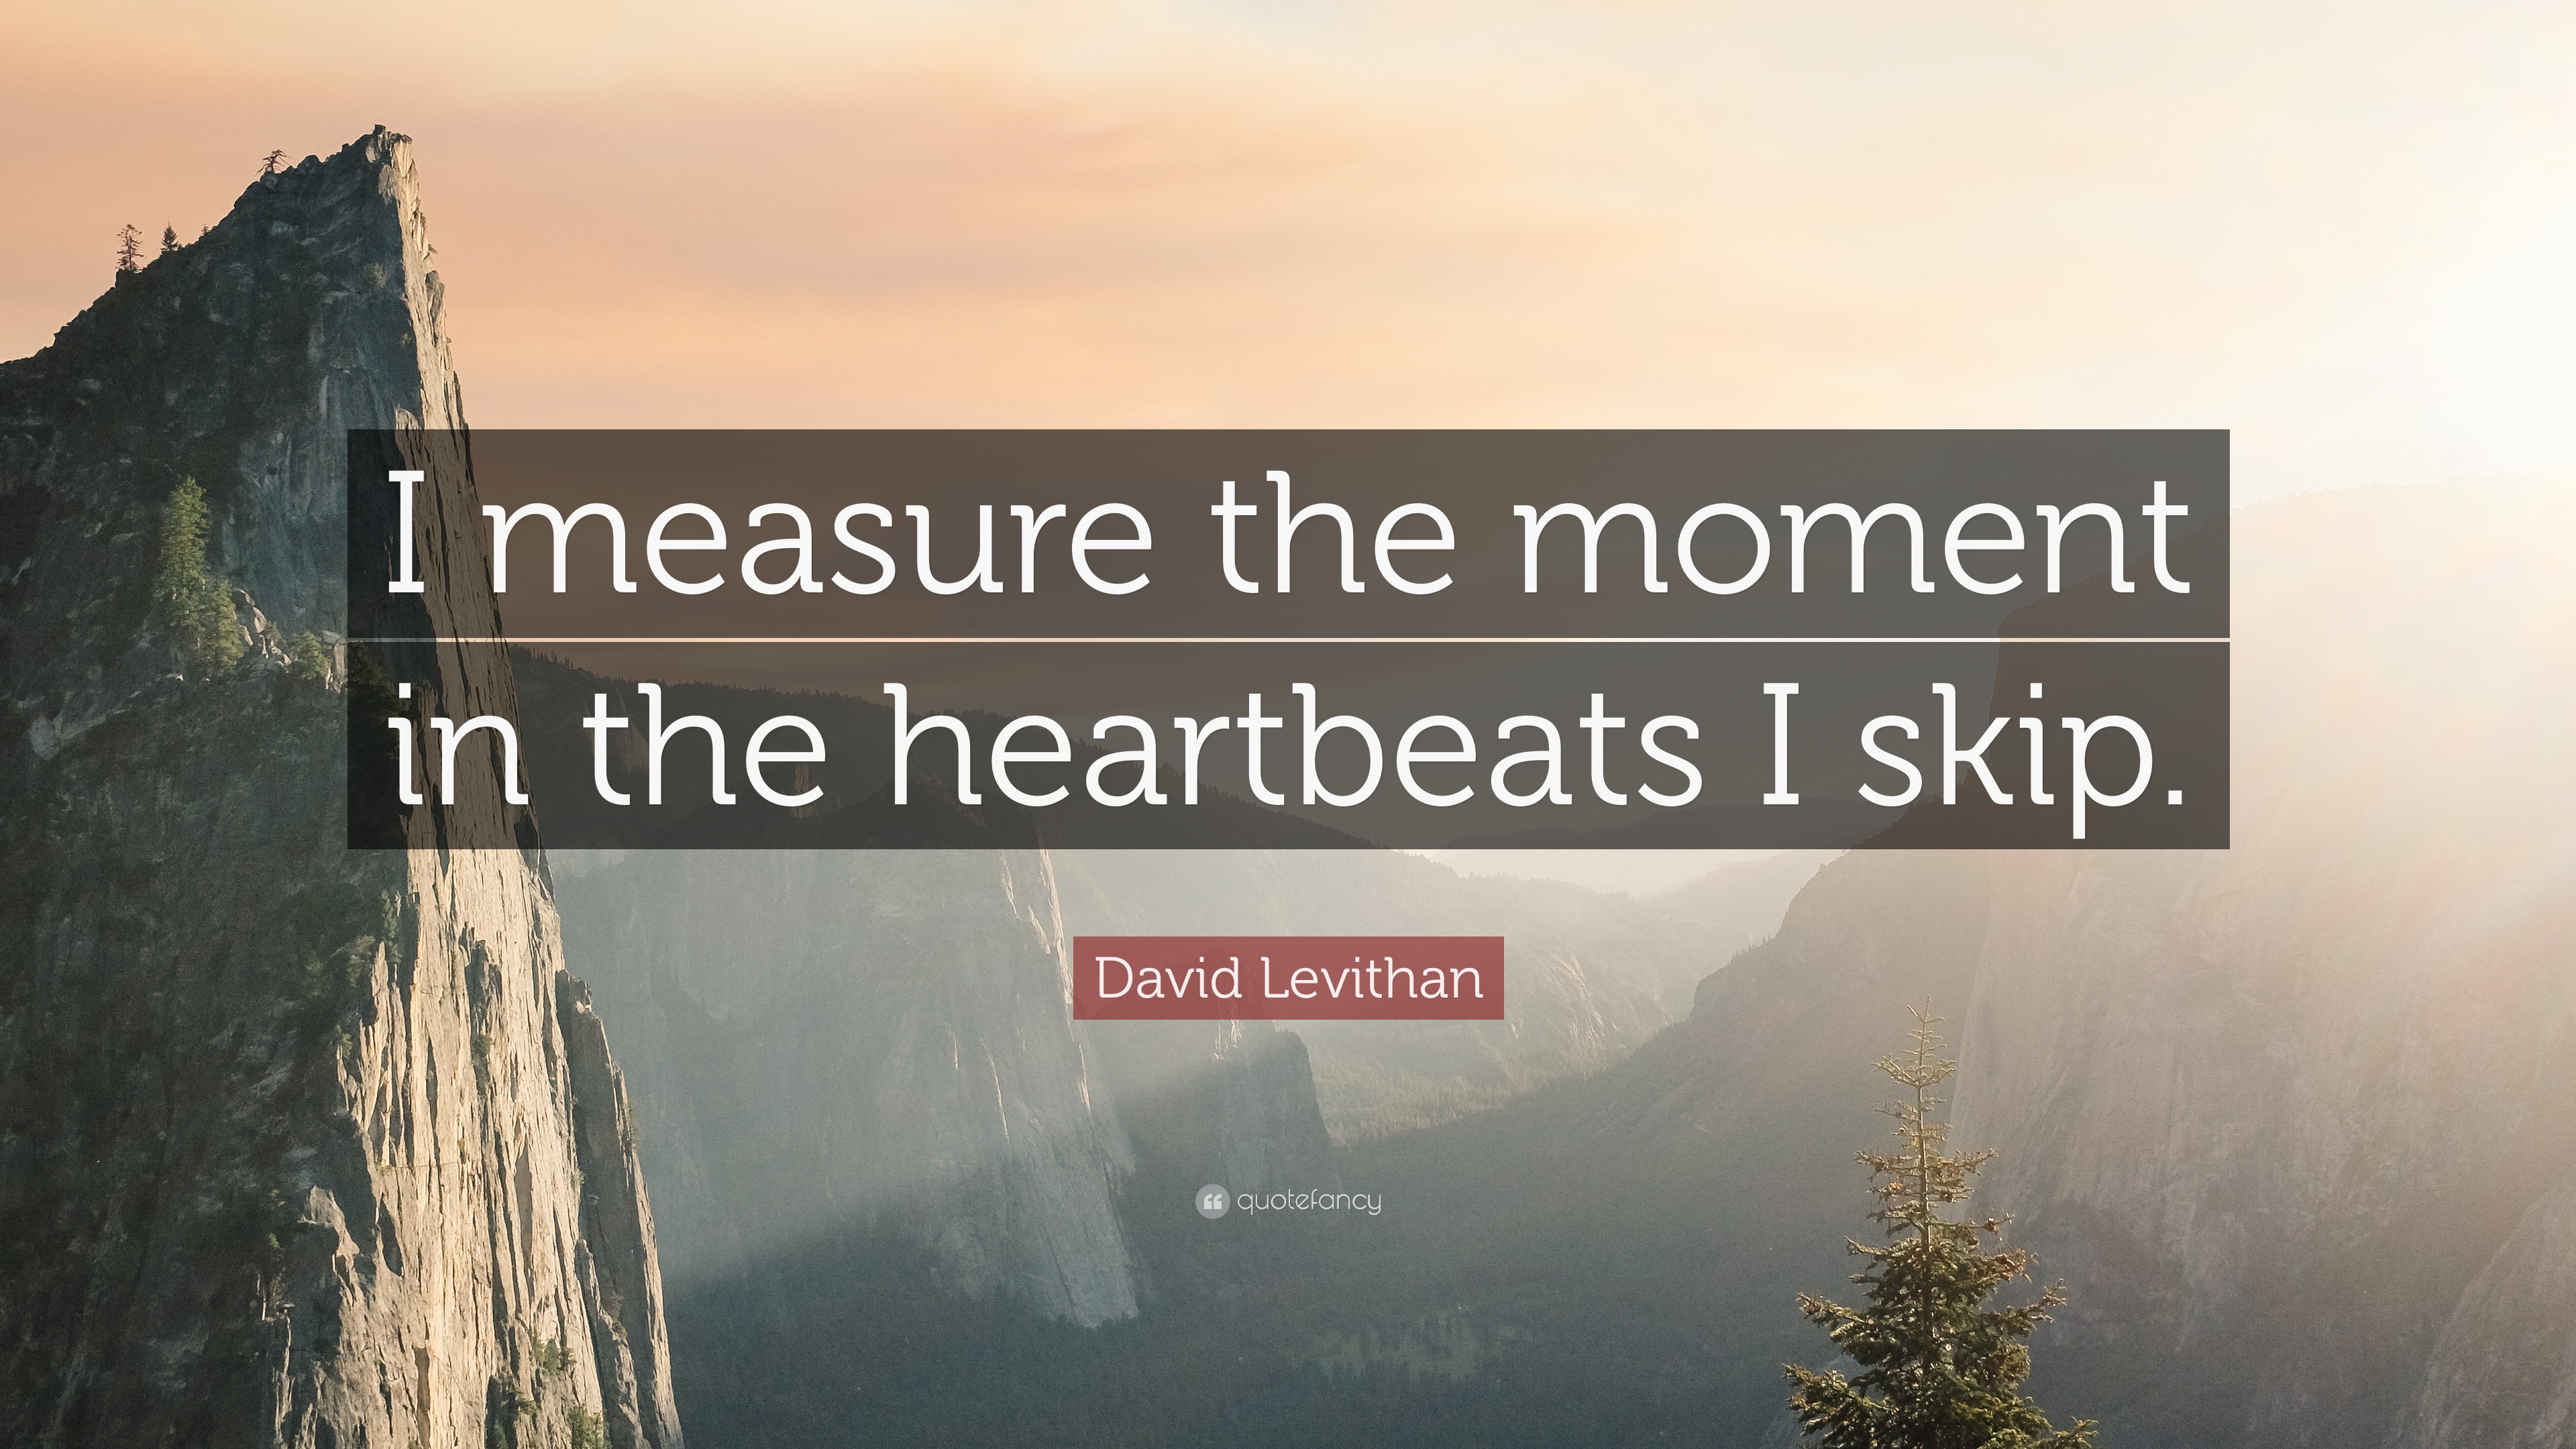 David Levithan Quote: “I measure the moment in